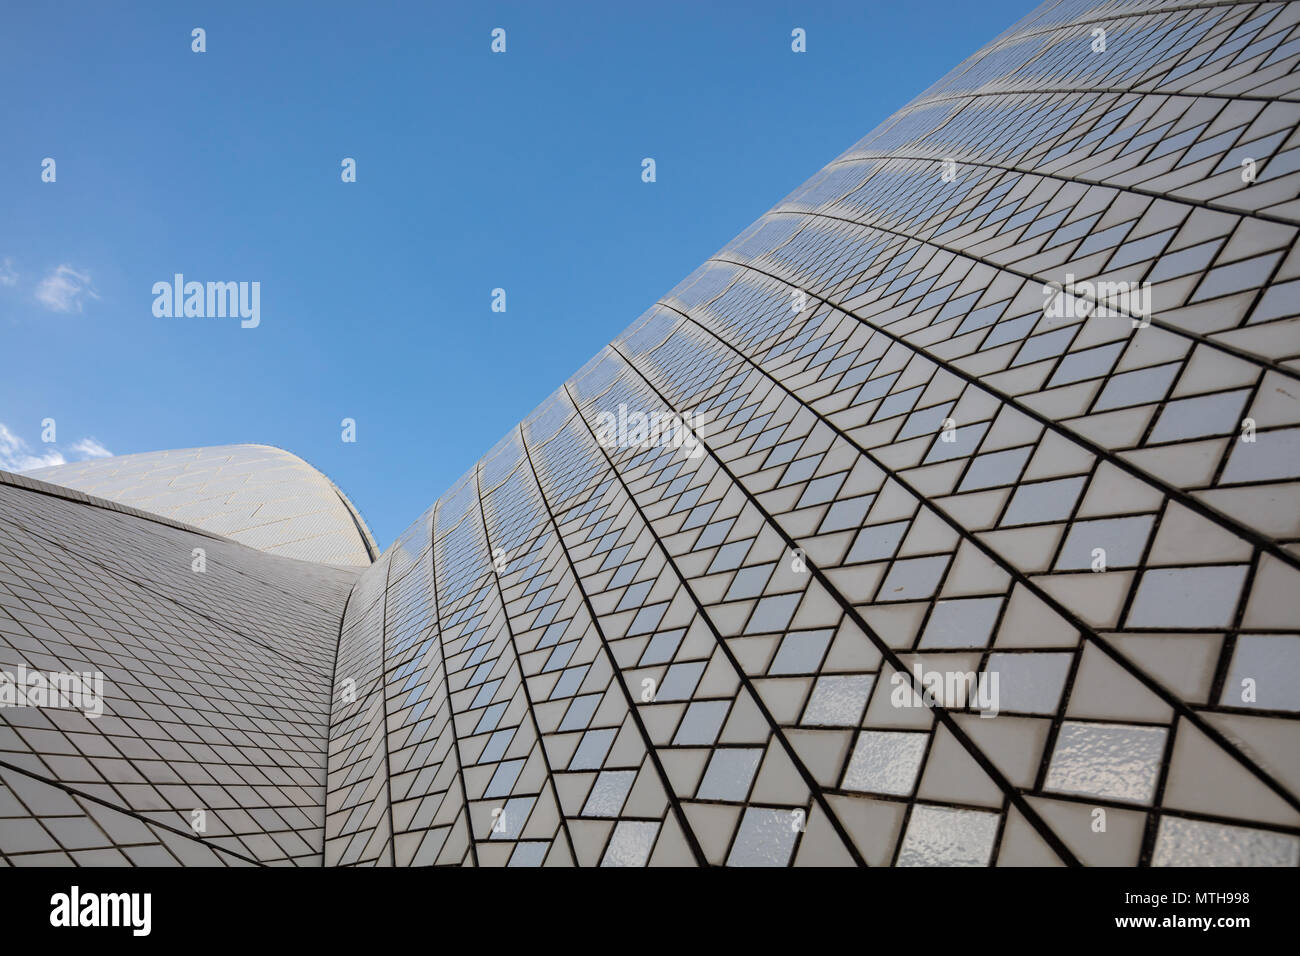 Abstract view of the Sydney Opera House tiles. Stock Photo